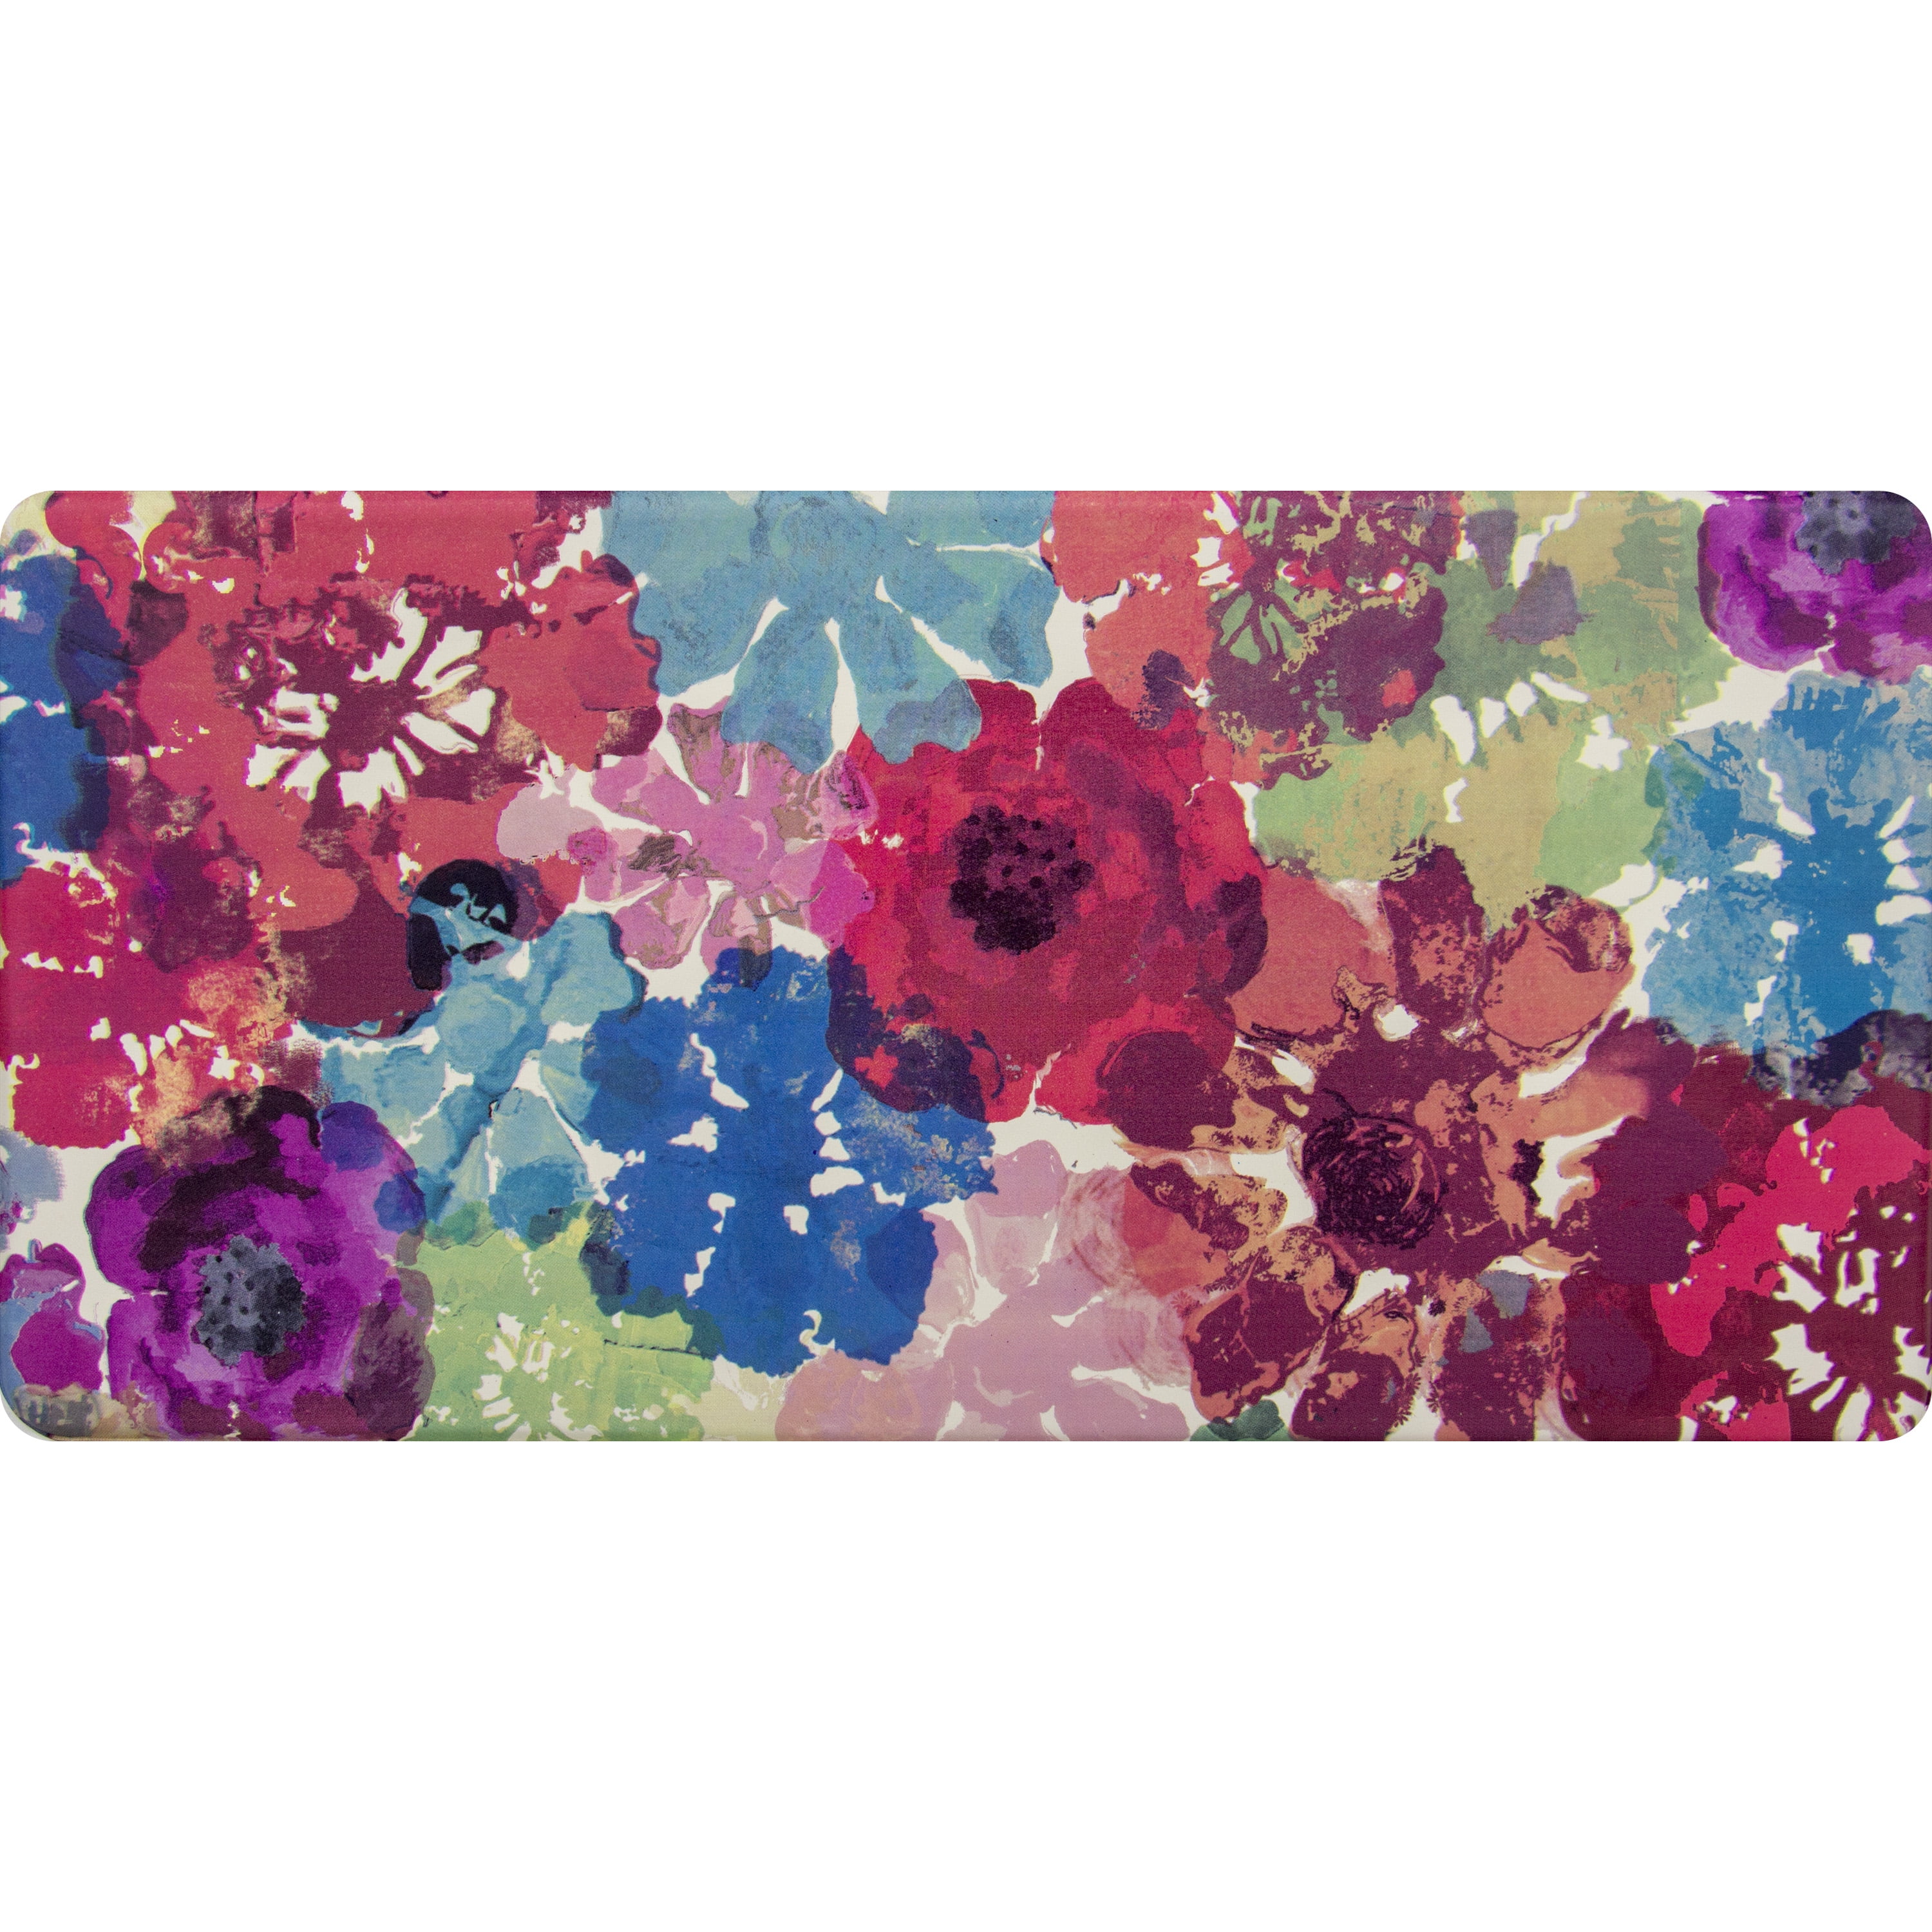 Large 34 x 21 in July Flowers Butterfly Dia Noche Memory Foam Bathroom or Kitchen Mats by Sascalia